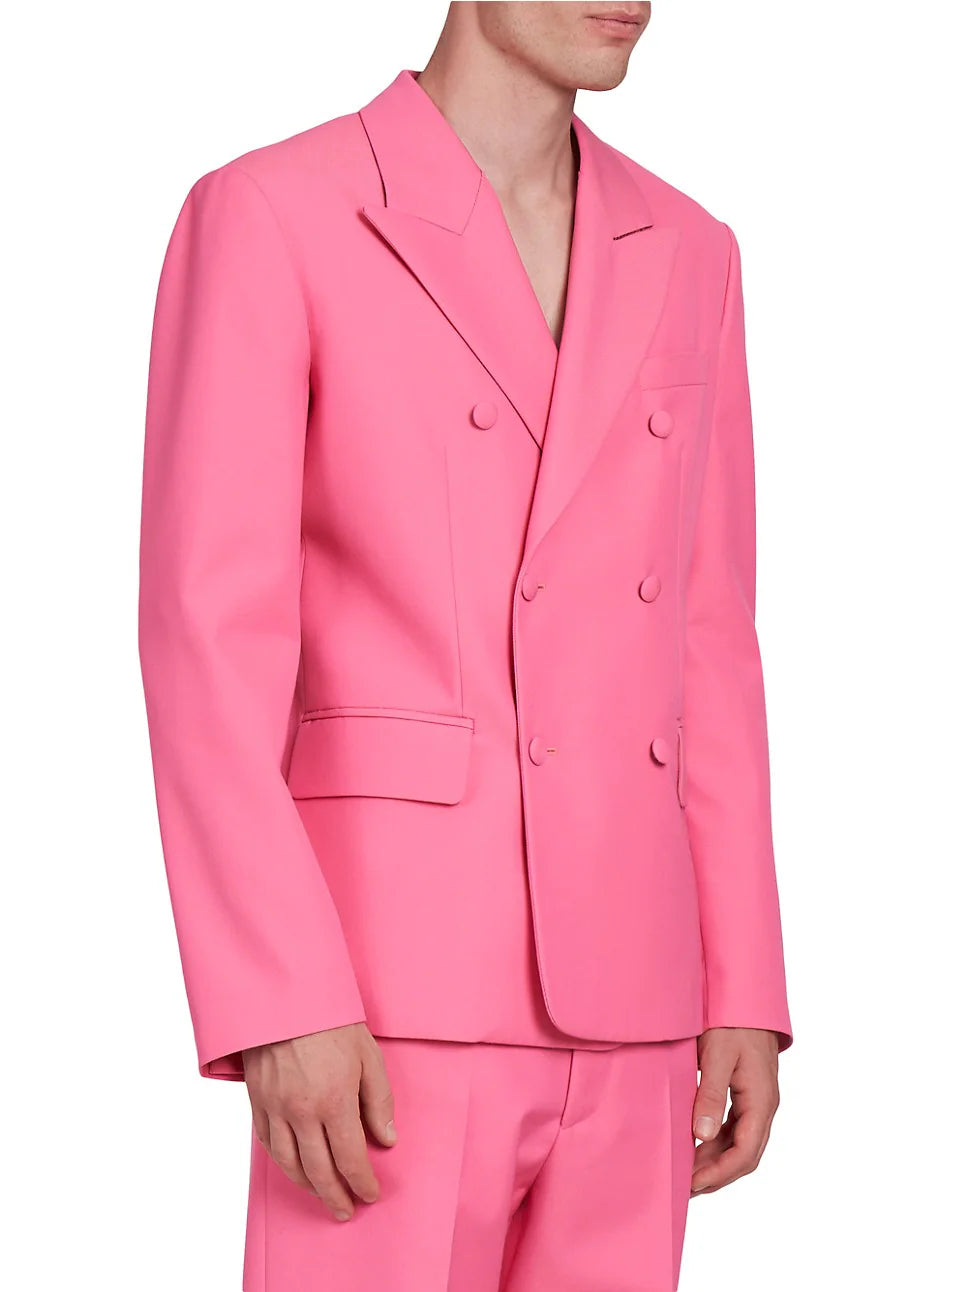 PALM ANGELS PINK DOUBLE BREASTED SUIT